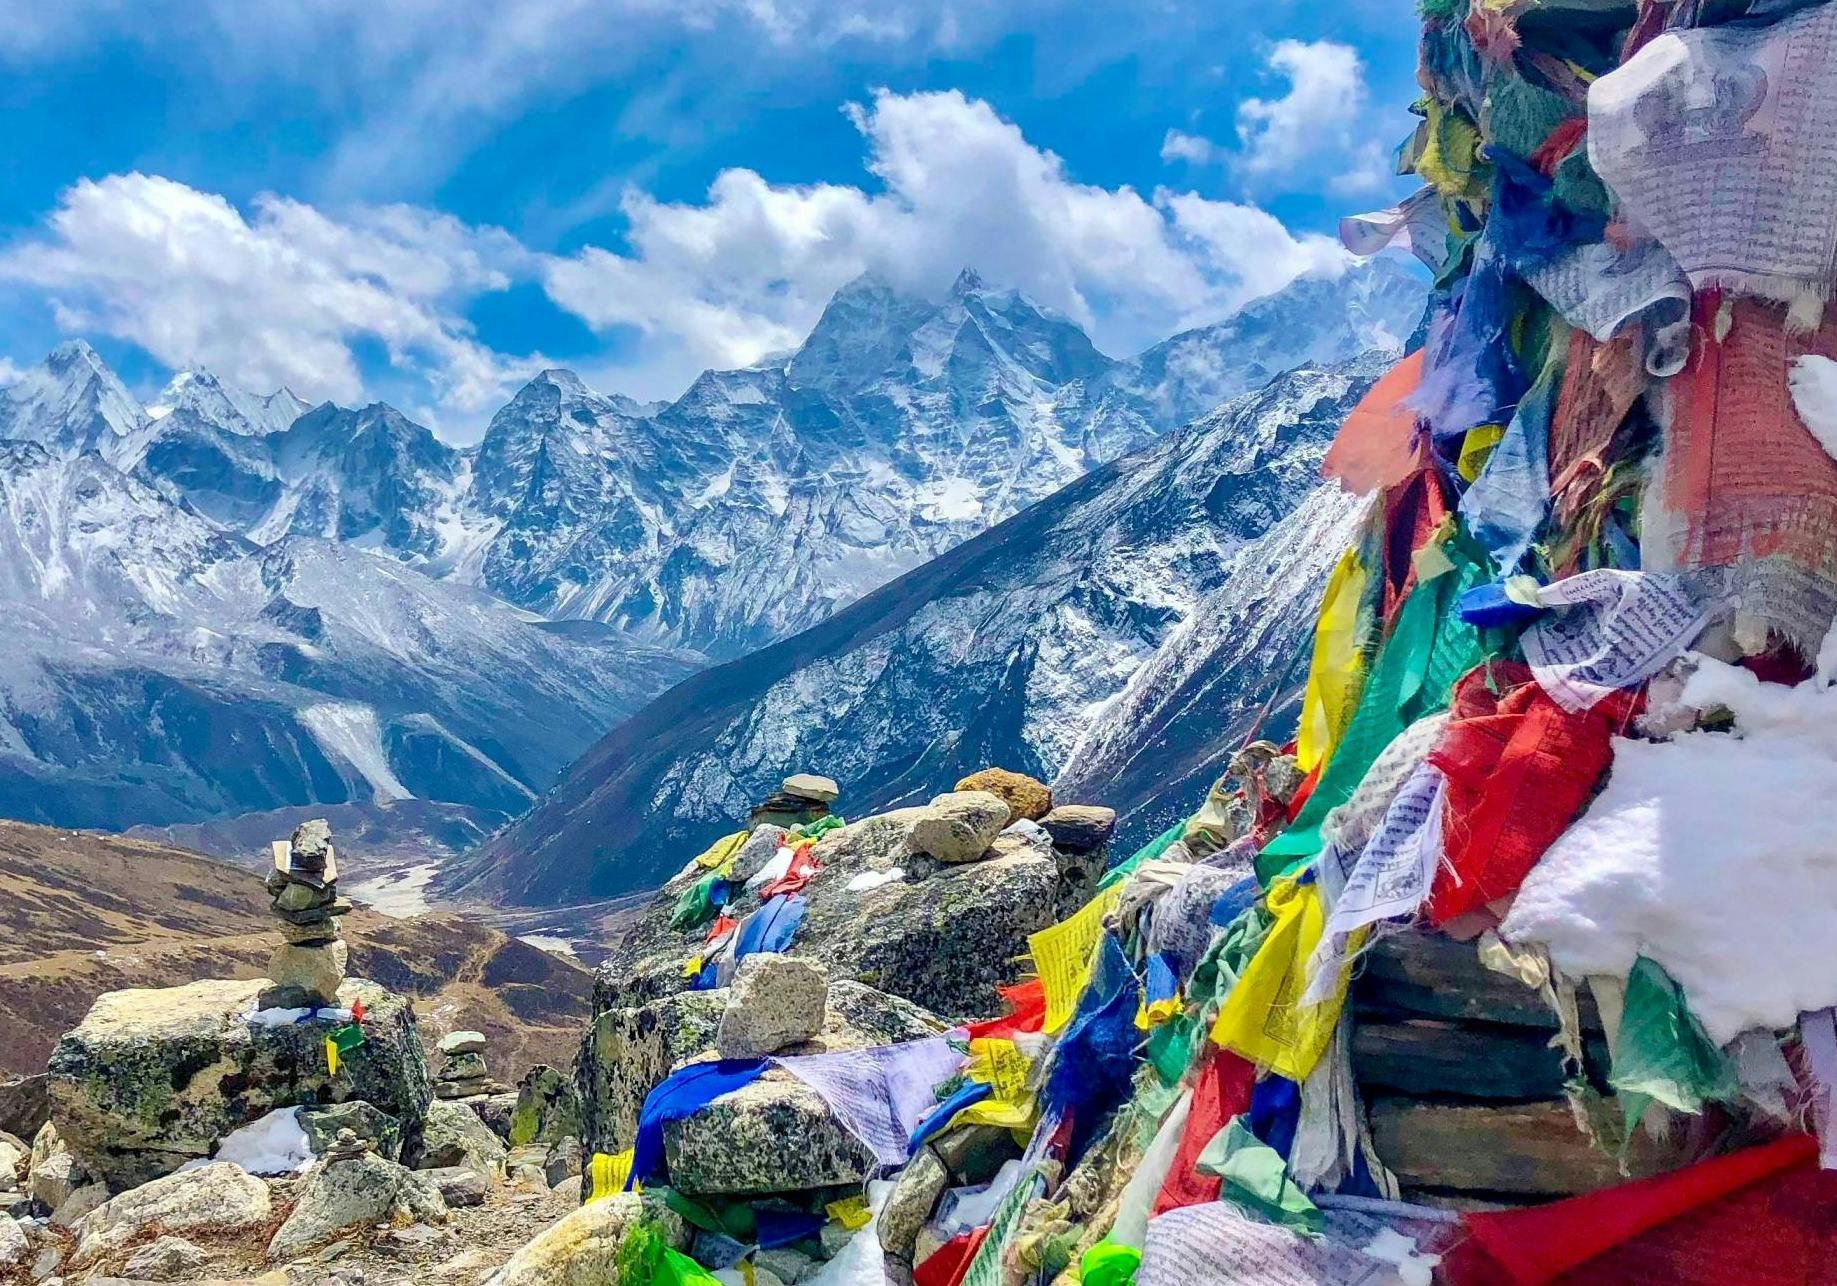 Everest Base Camp Trek Month Wise: Weather and Temperature